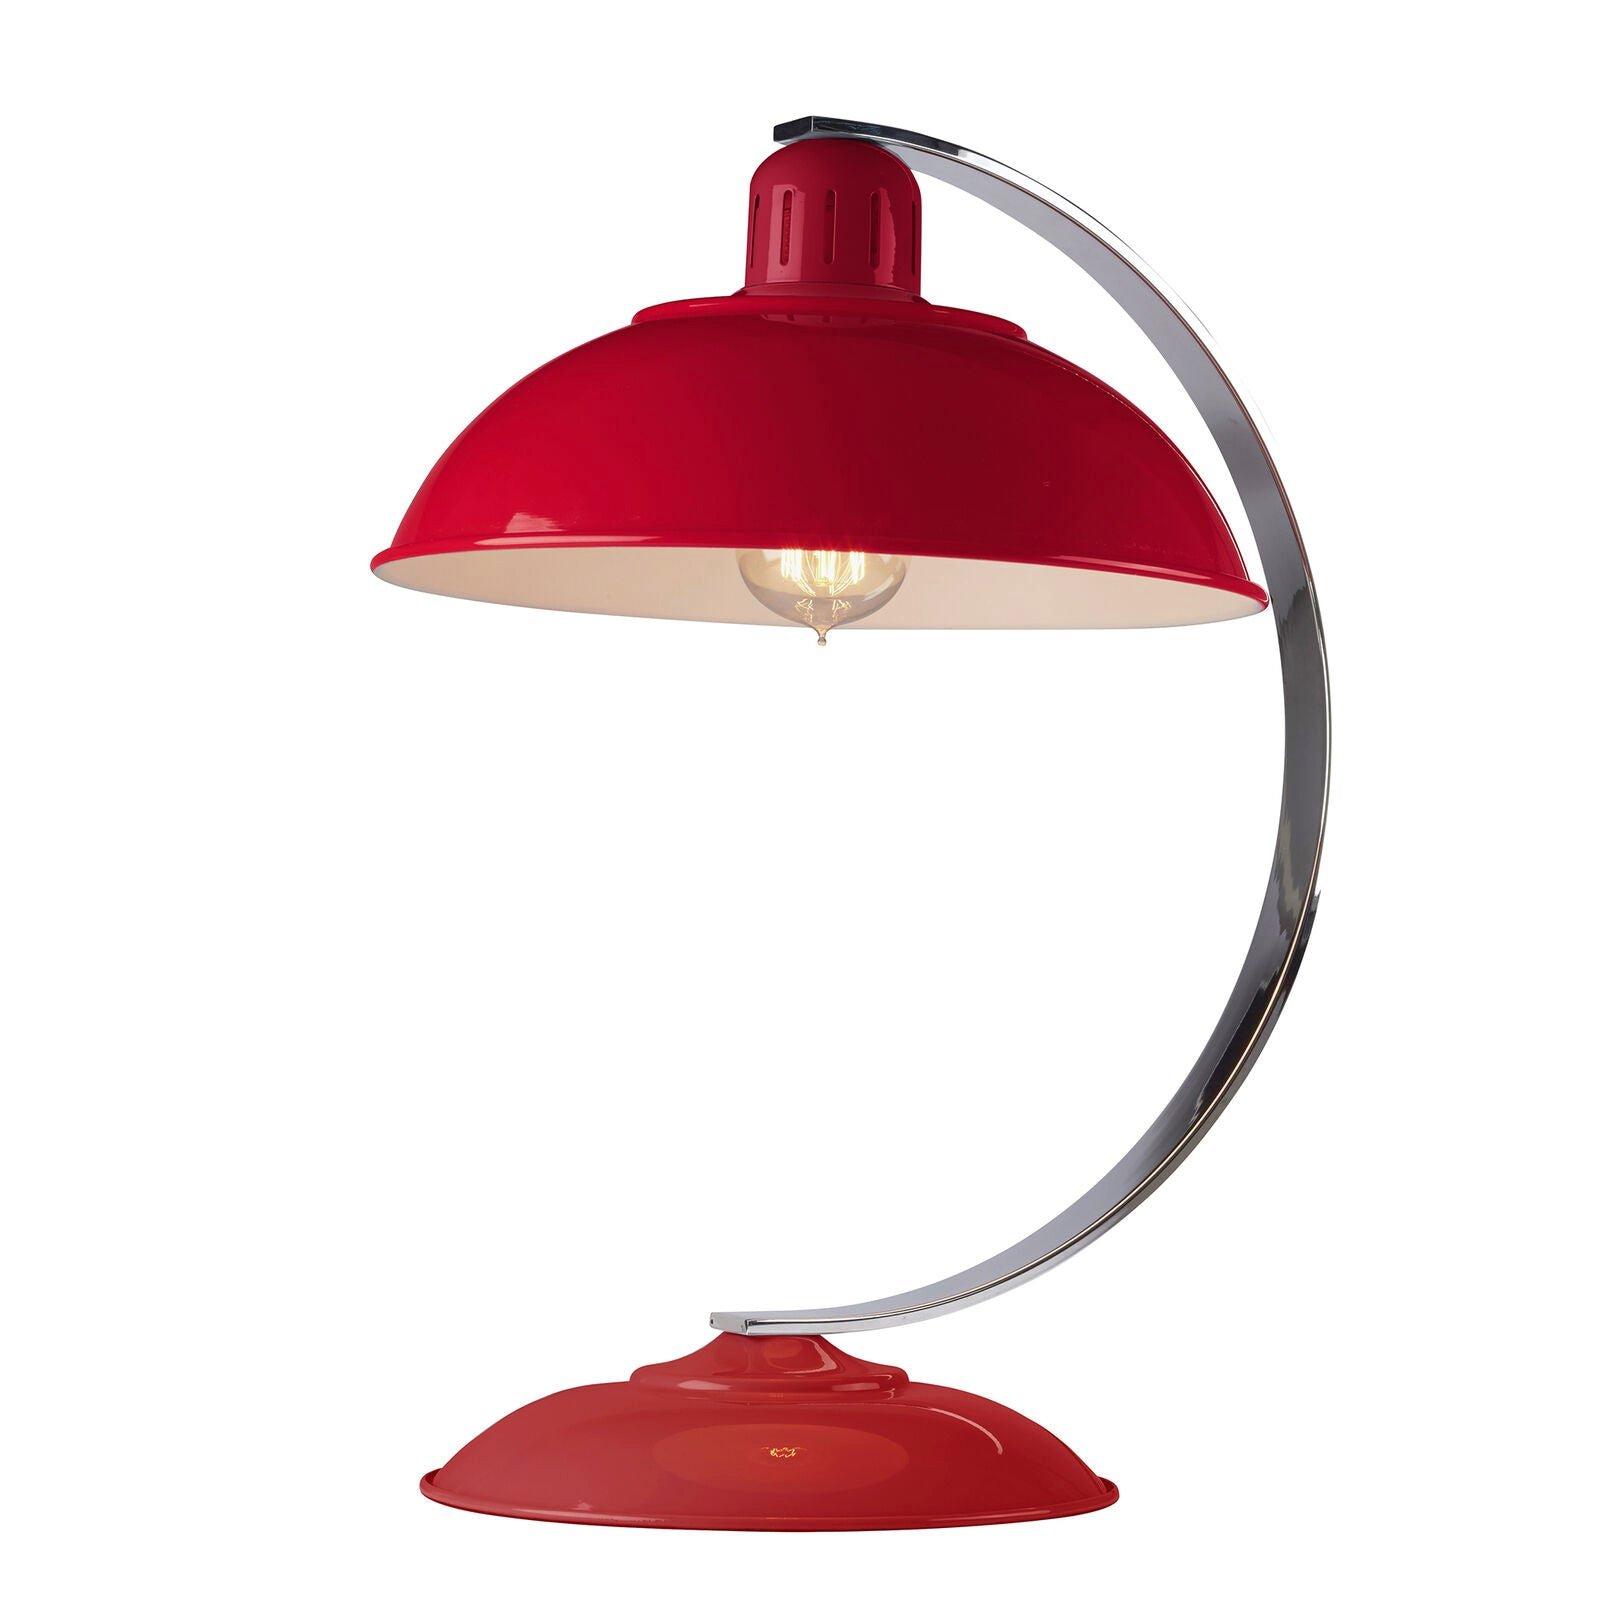 Table Lamp Curved Arm Retro Style Office Light Traffic Red LED E27 60W Bulb